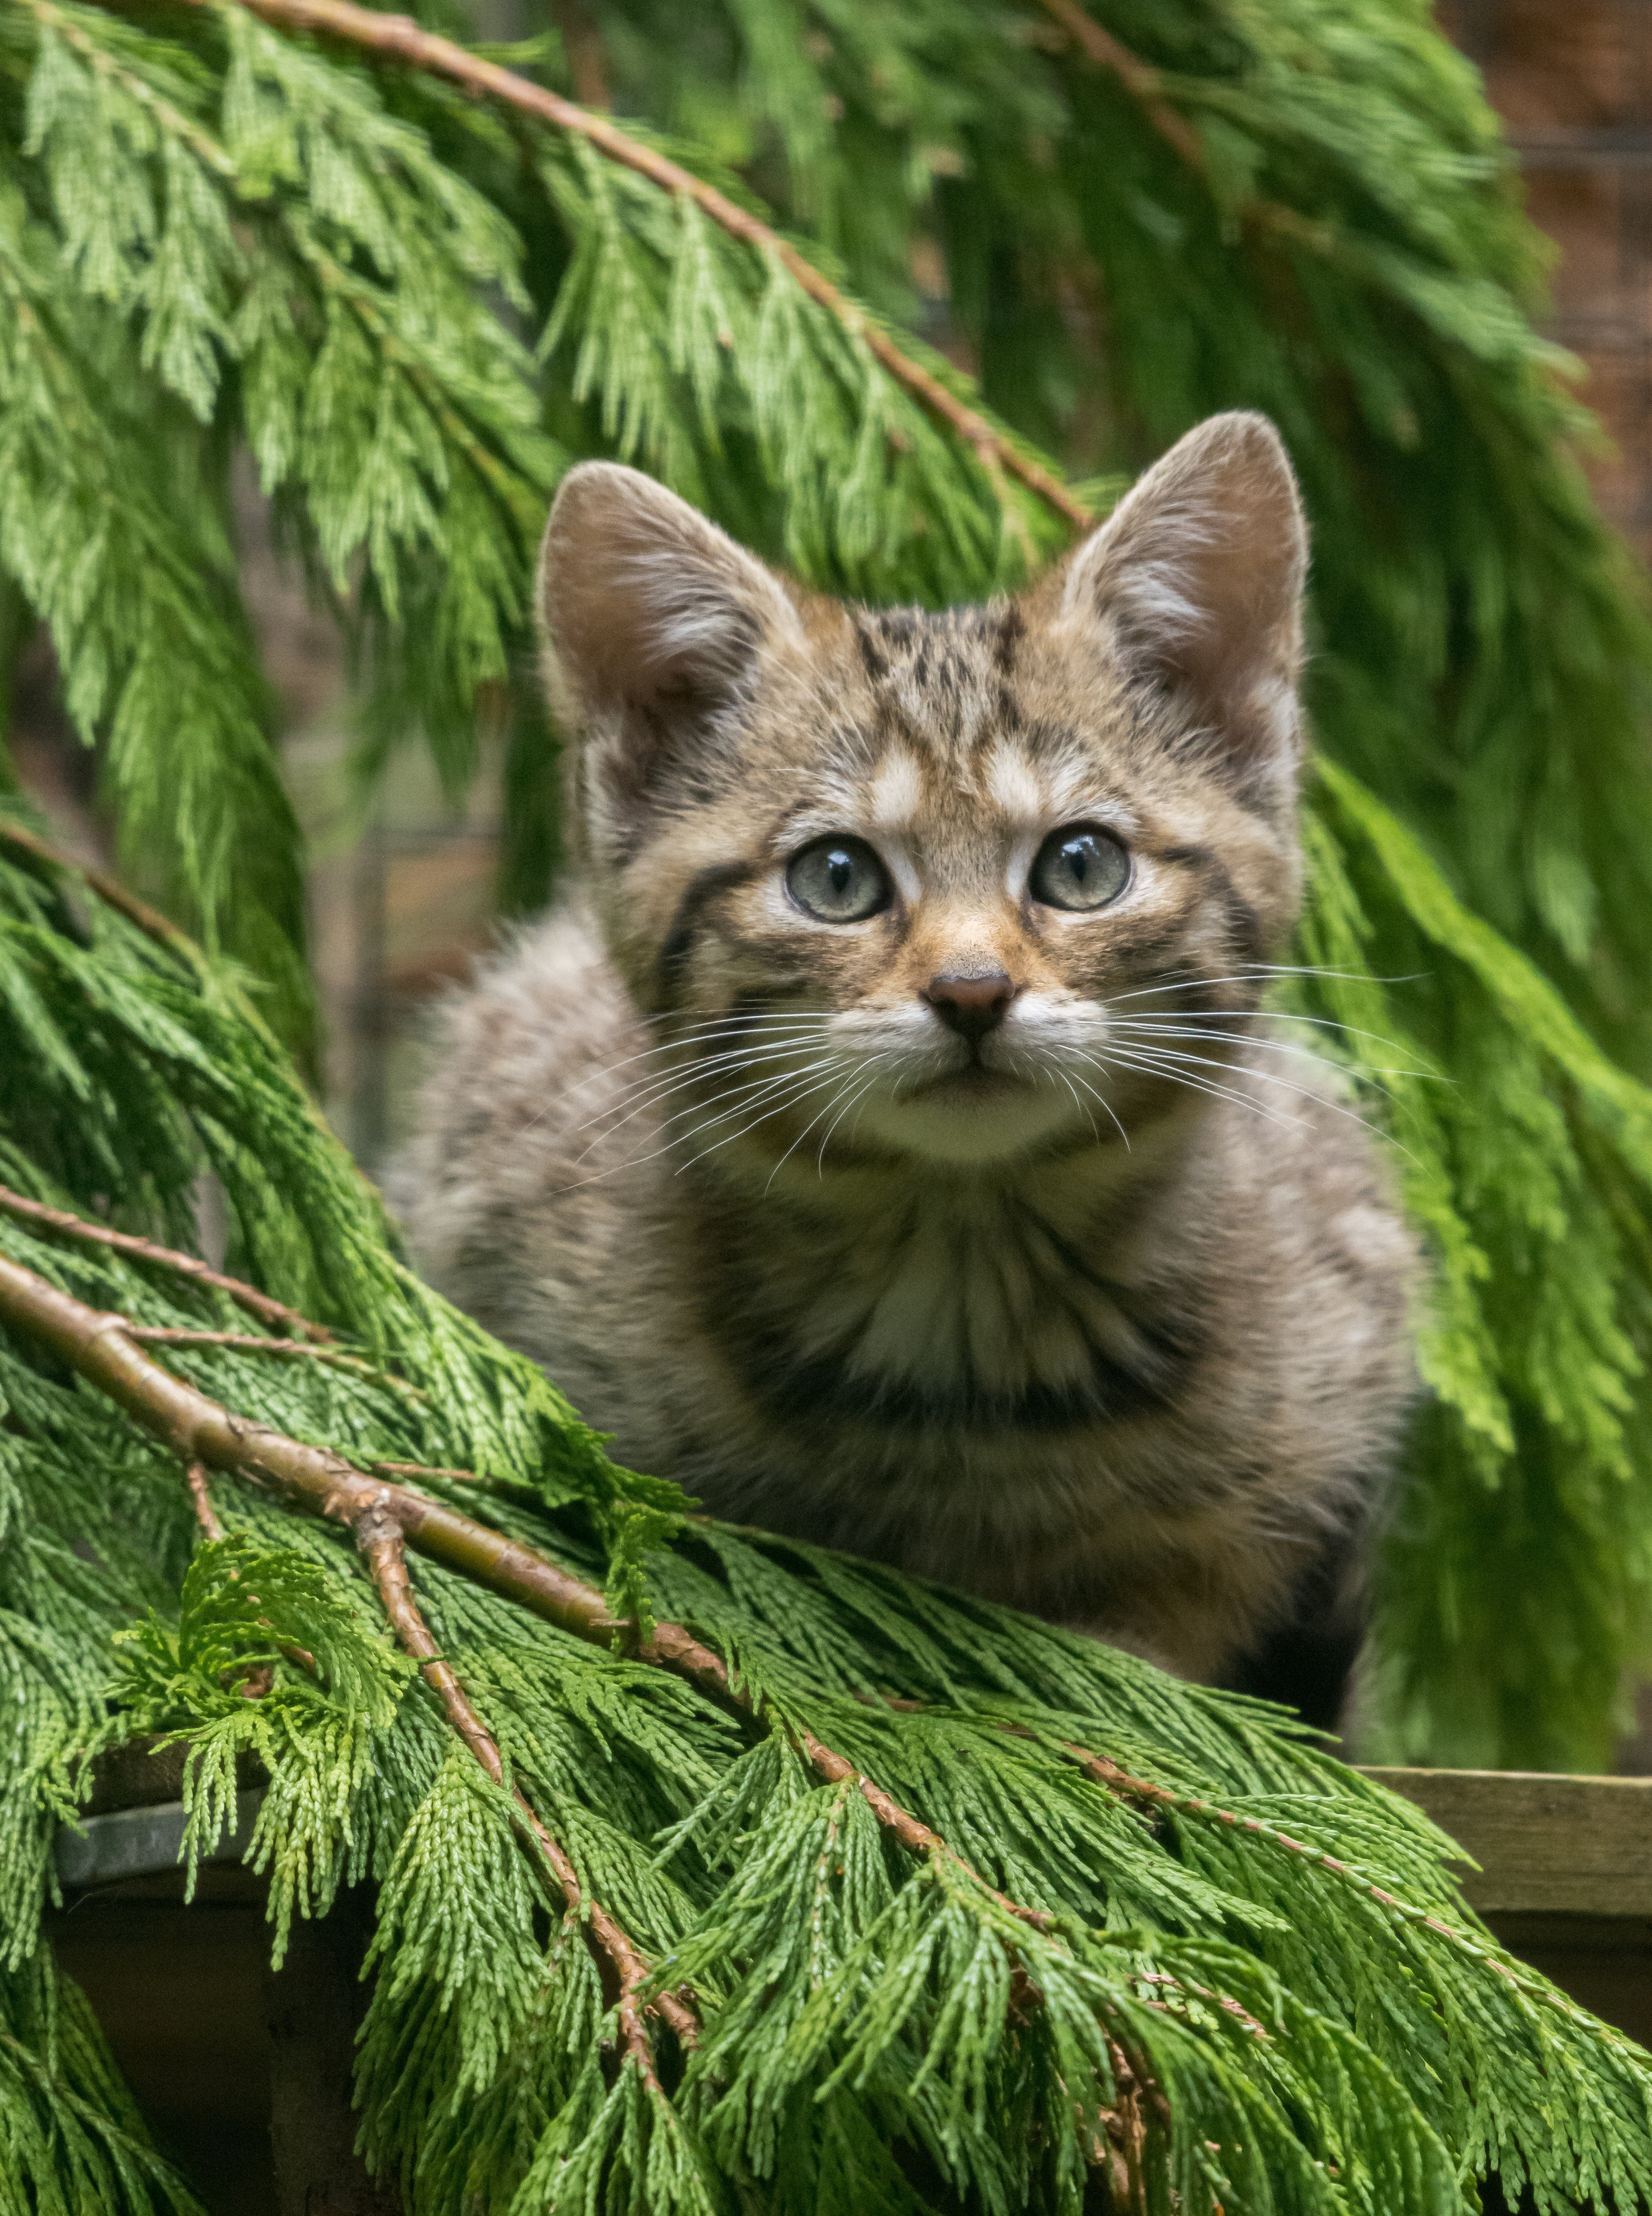 Finlay, a one-year-old wildcat similar to the one pictured, has been seized by police from a property in Wales where organisation Wildcat Haven claims it was rehabilitating the animal (Alyson Houston/RZSS/PA)